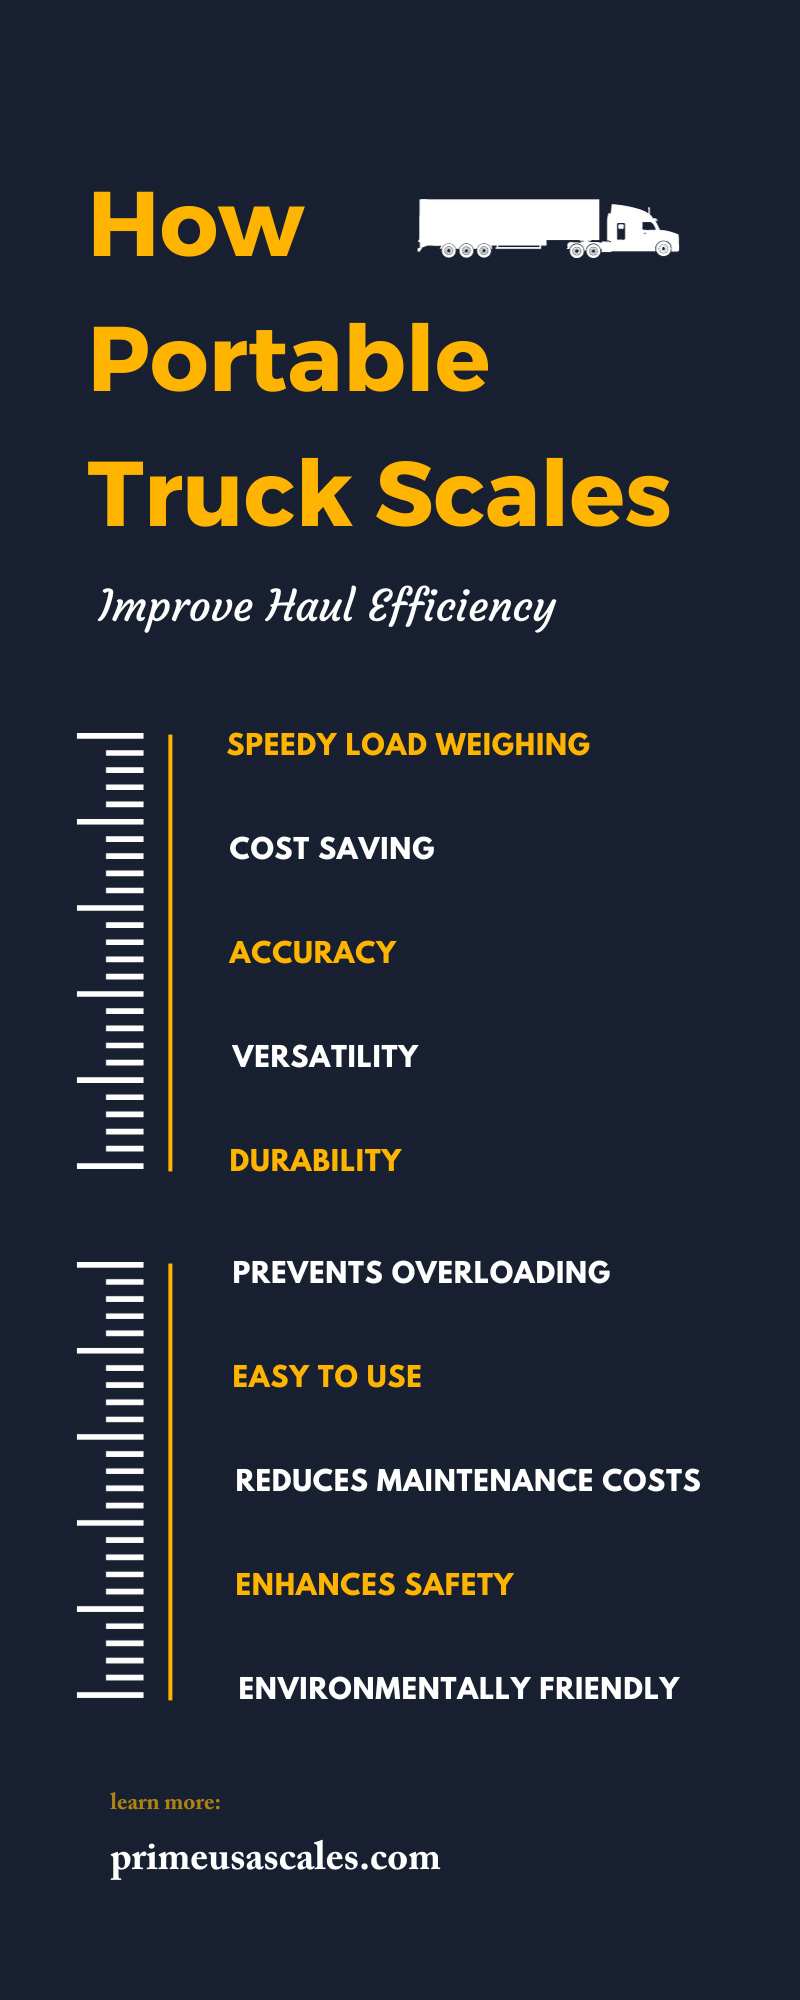 How Portable Truck Scales Improve Haul Efficiency